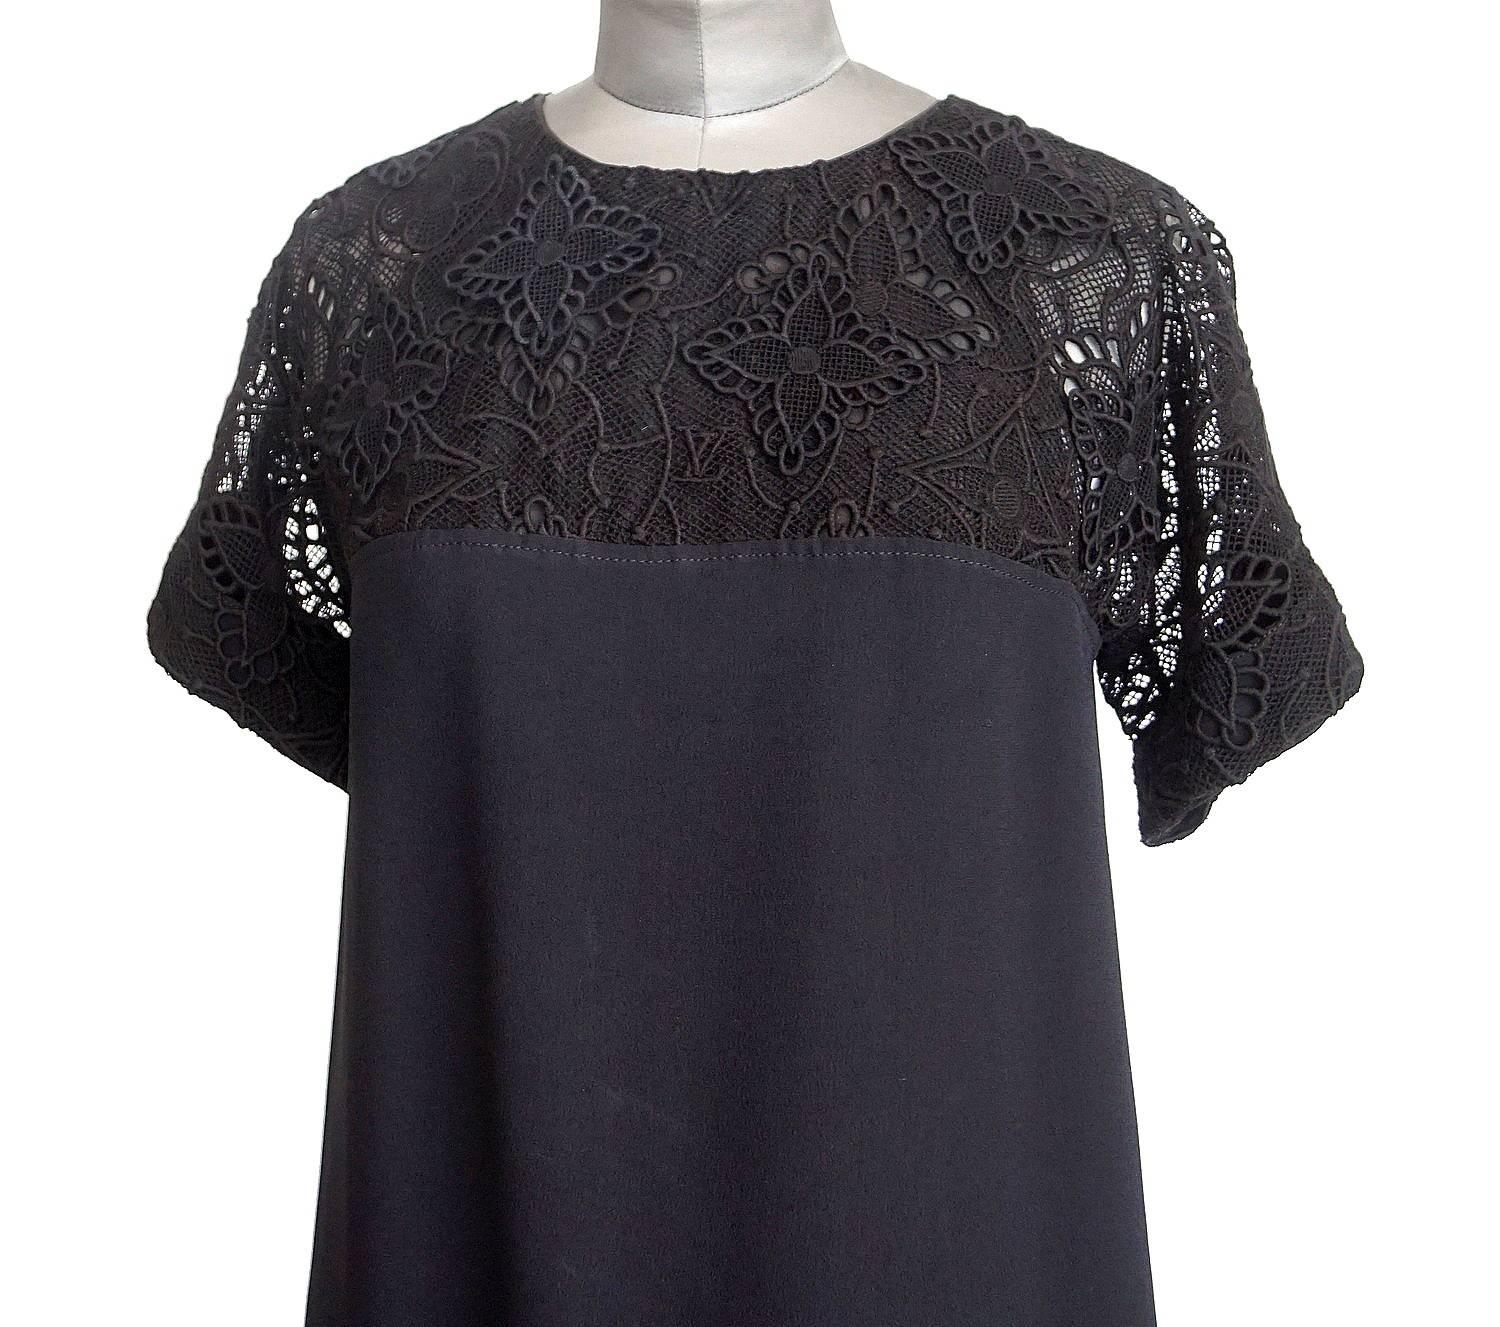 Chic Louis Vuitton dress with beautifully detailed Monogram lace from neckline to top of bust and sleeve.
Dress has a subtle A-line.
Bold gold zip with embossed pull at rear.
Embroidery is cotton, rest is acetate and viscose and lining is silk.
NEW